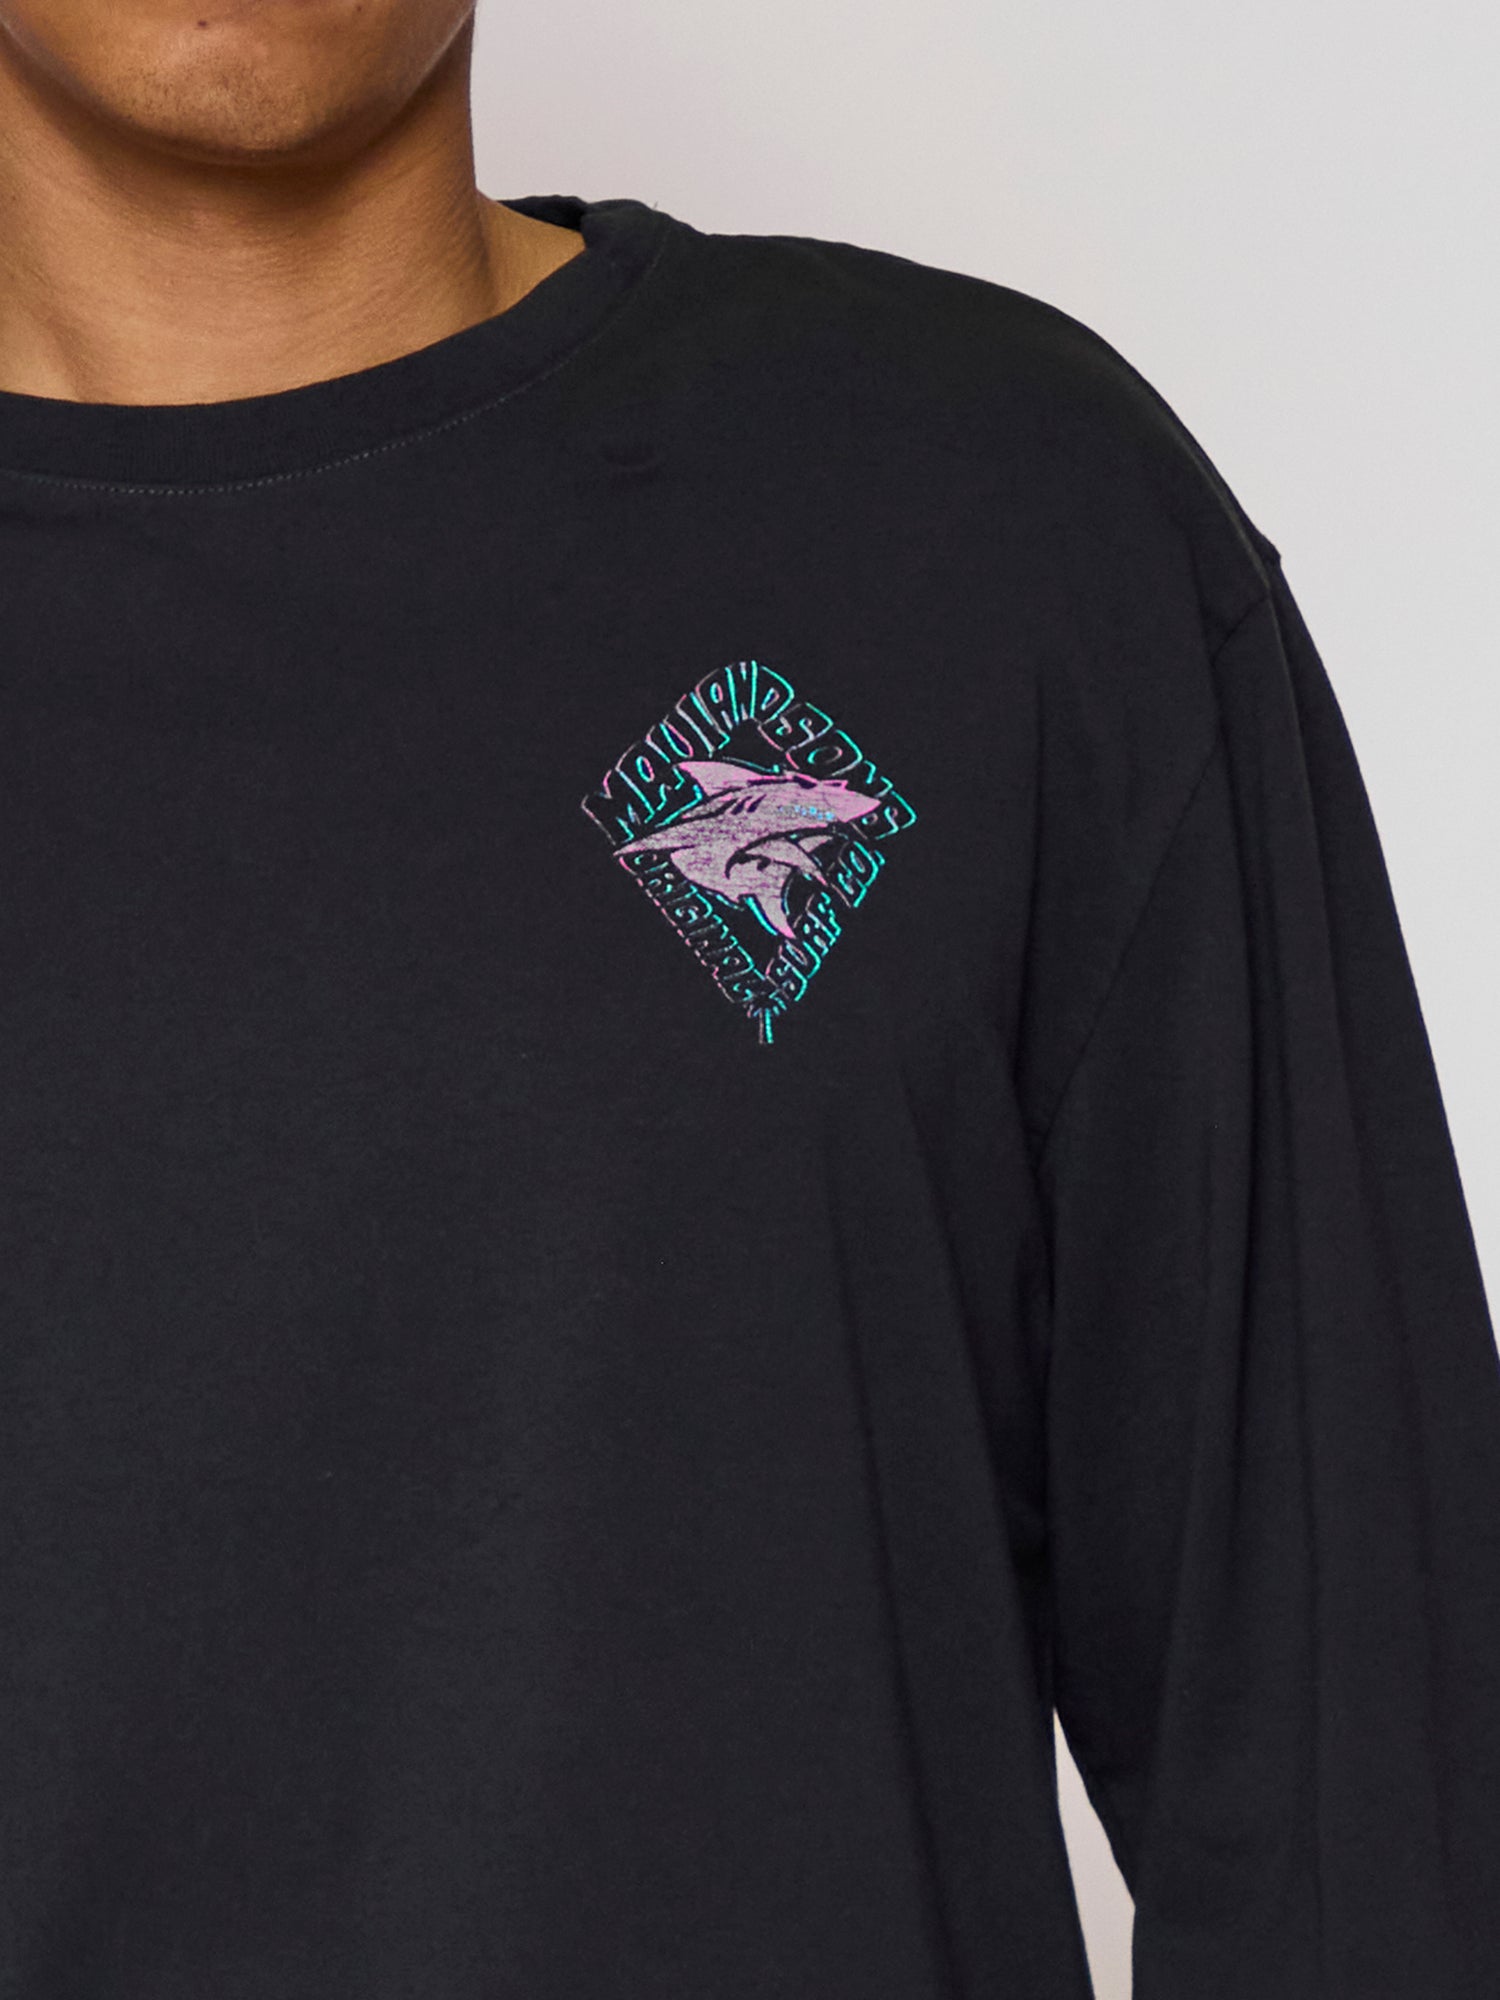 Back to Back Long Sleeve in Black